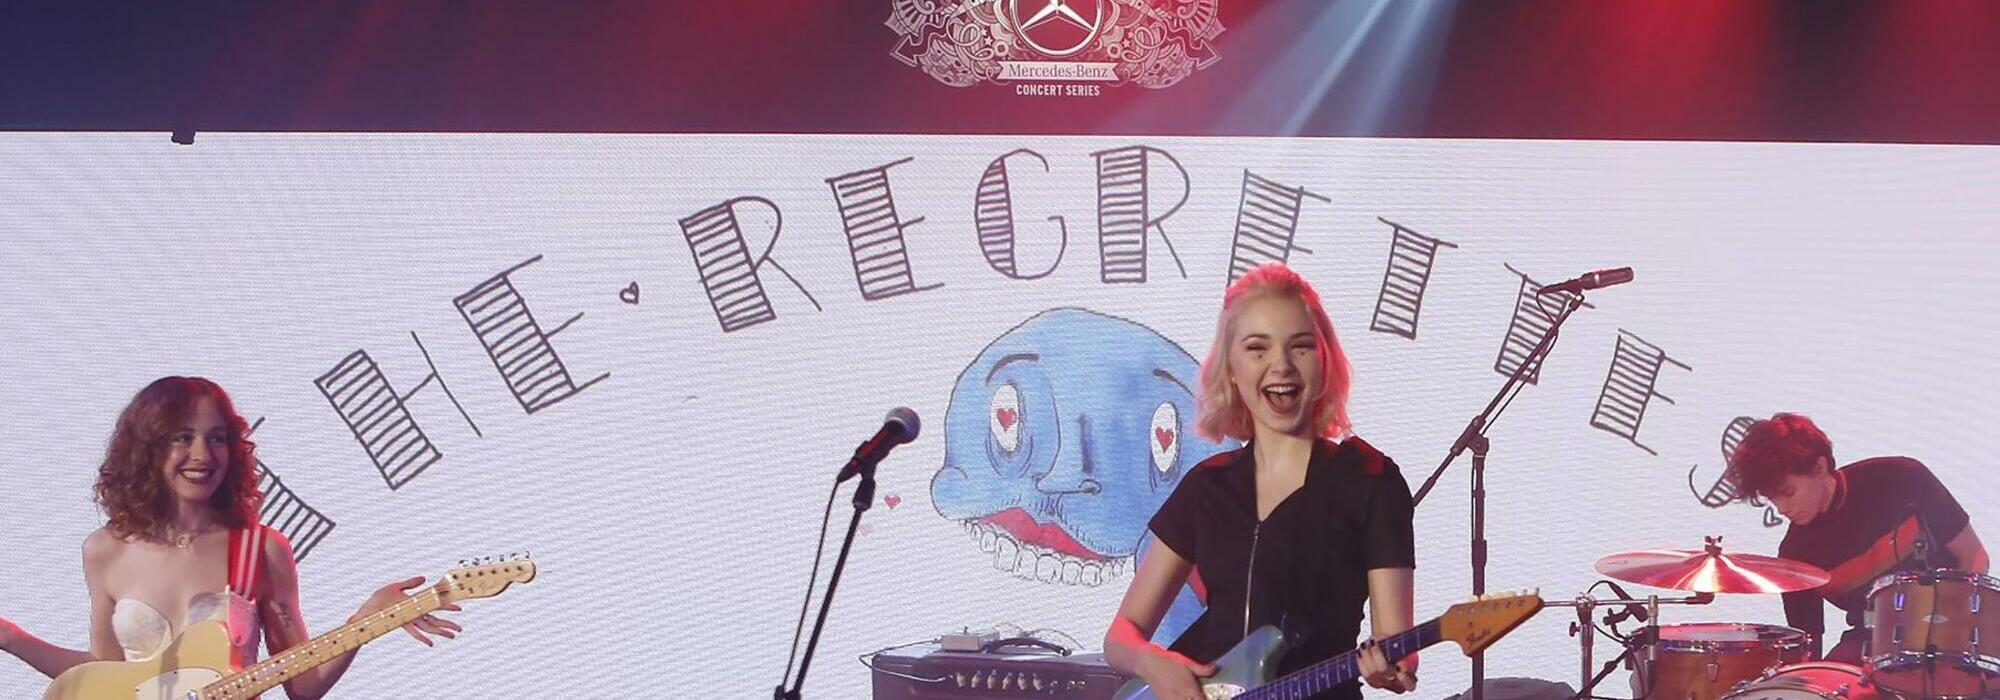 A The Regrettes live event